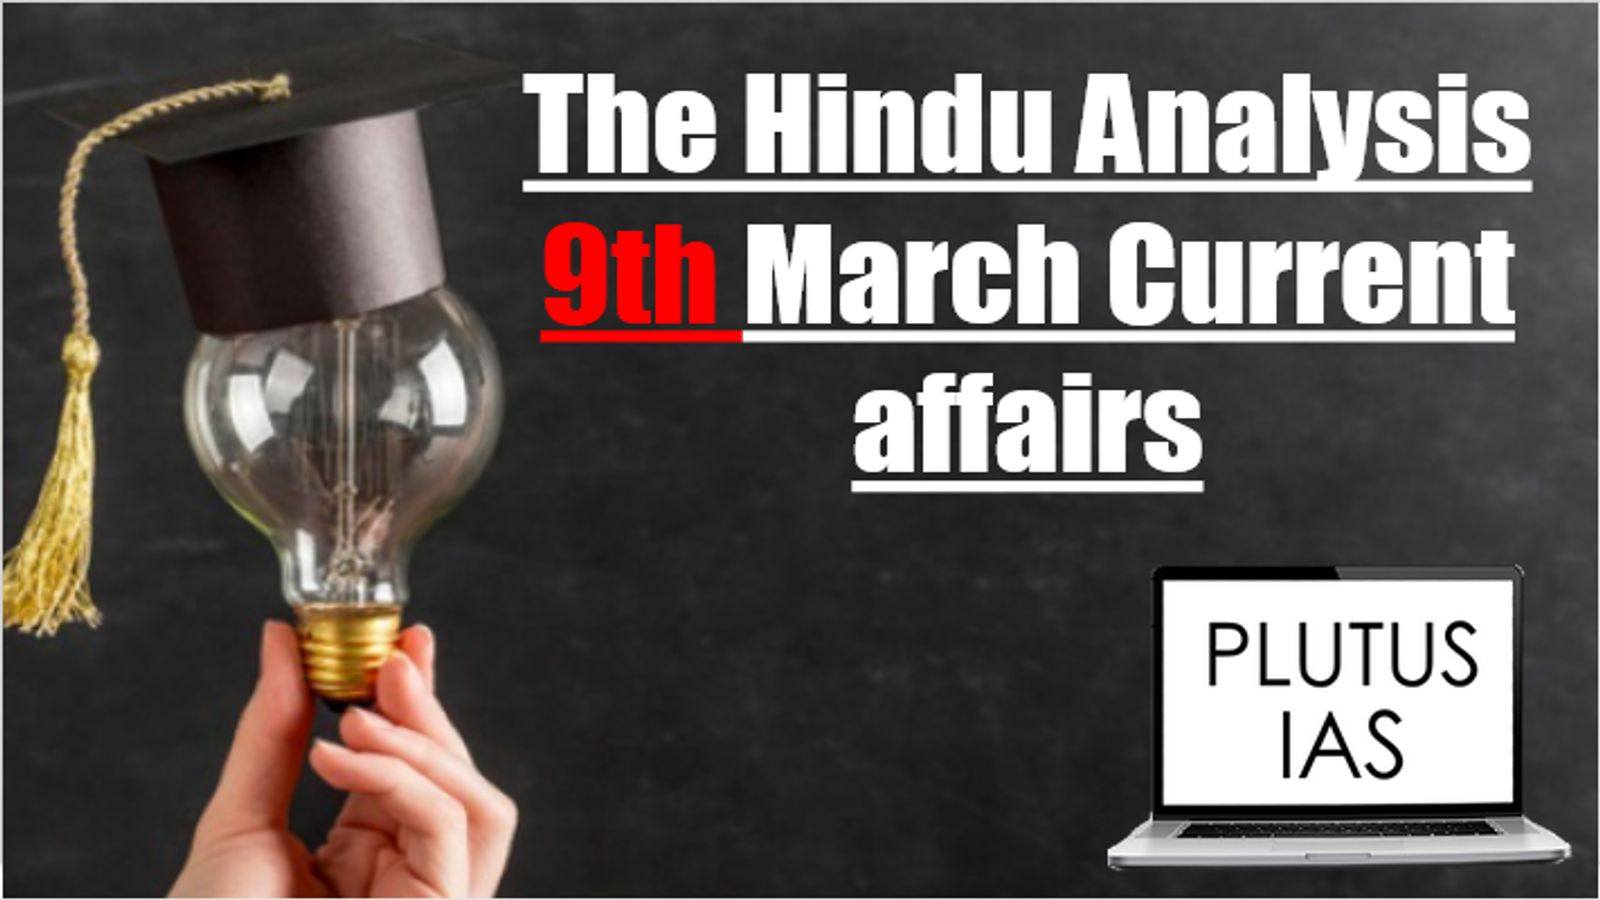 The Hindu Analysis 9th March Current Affairs